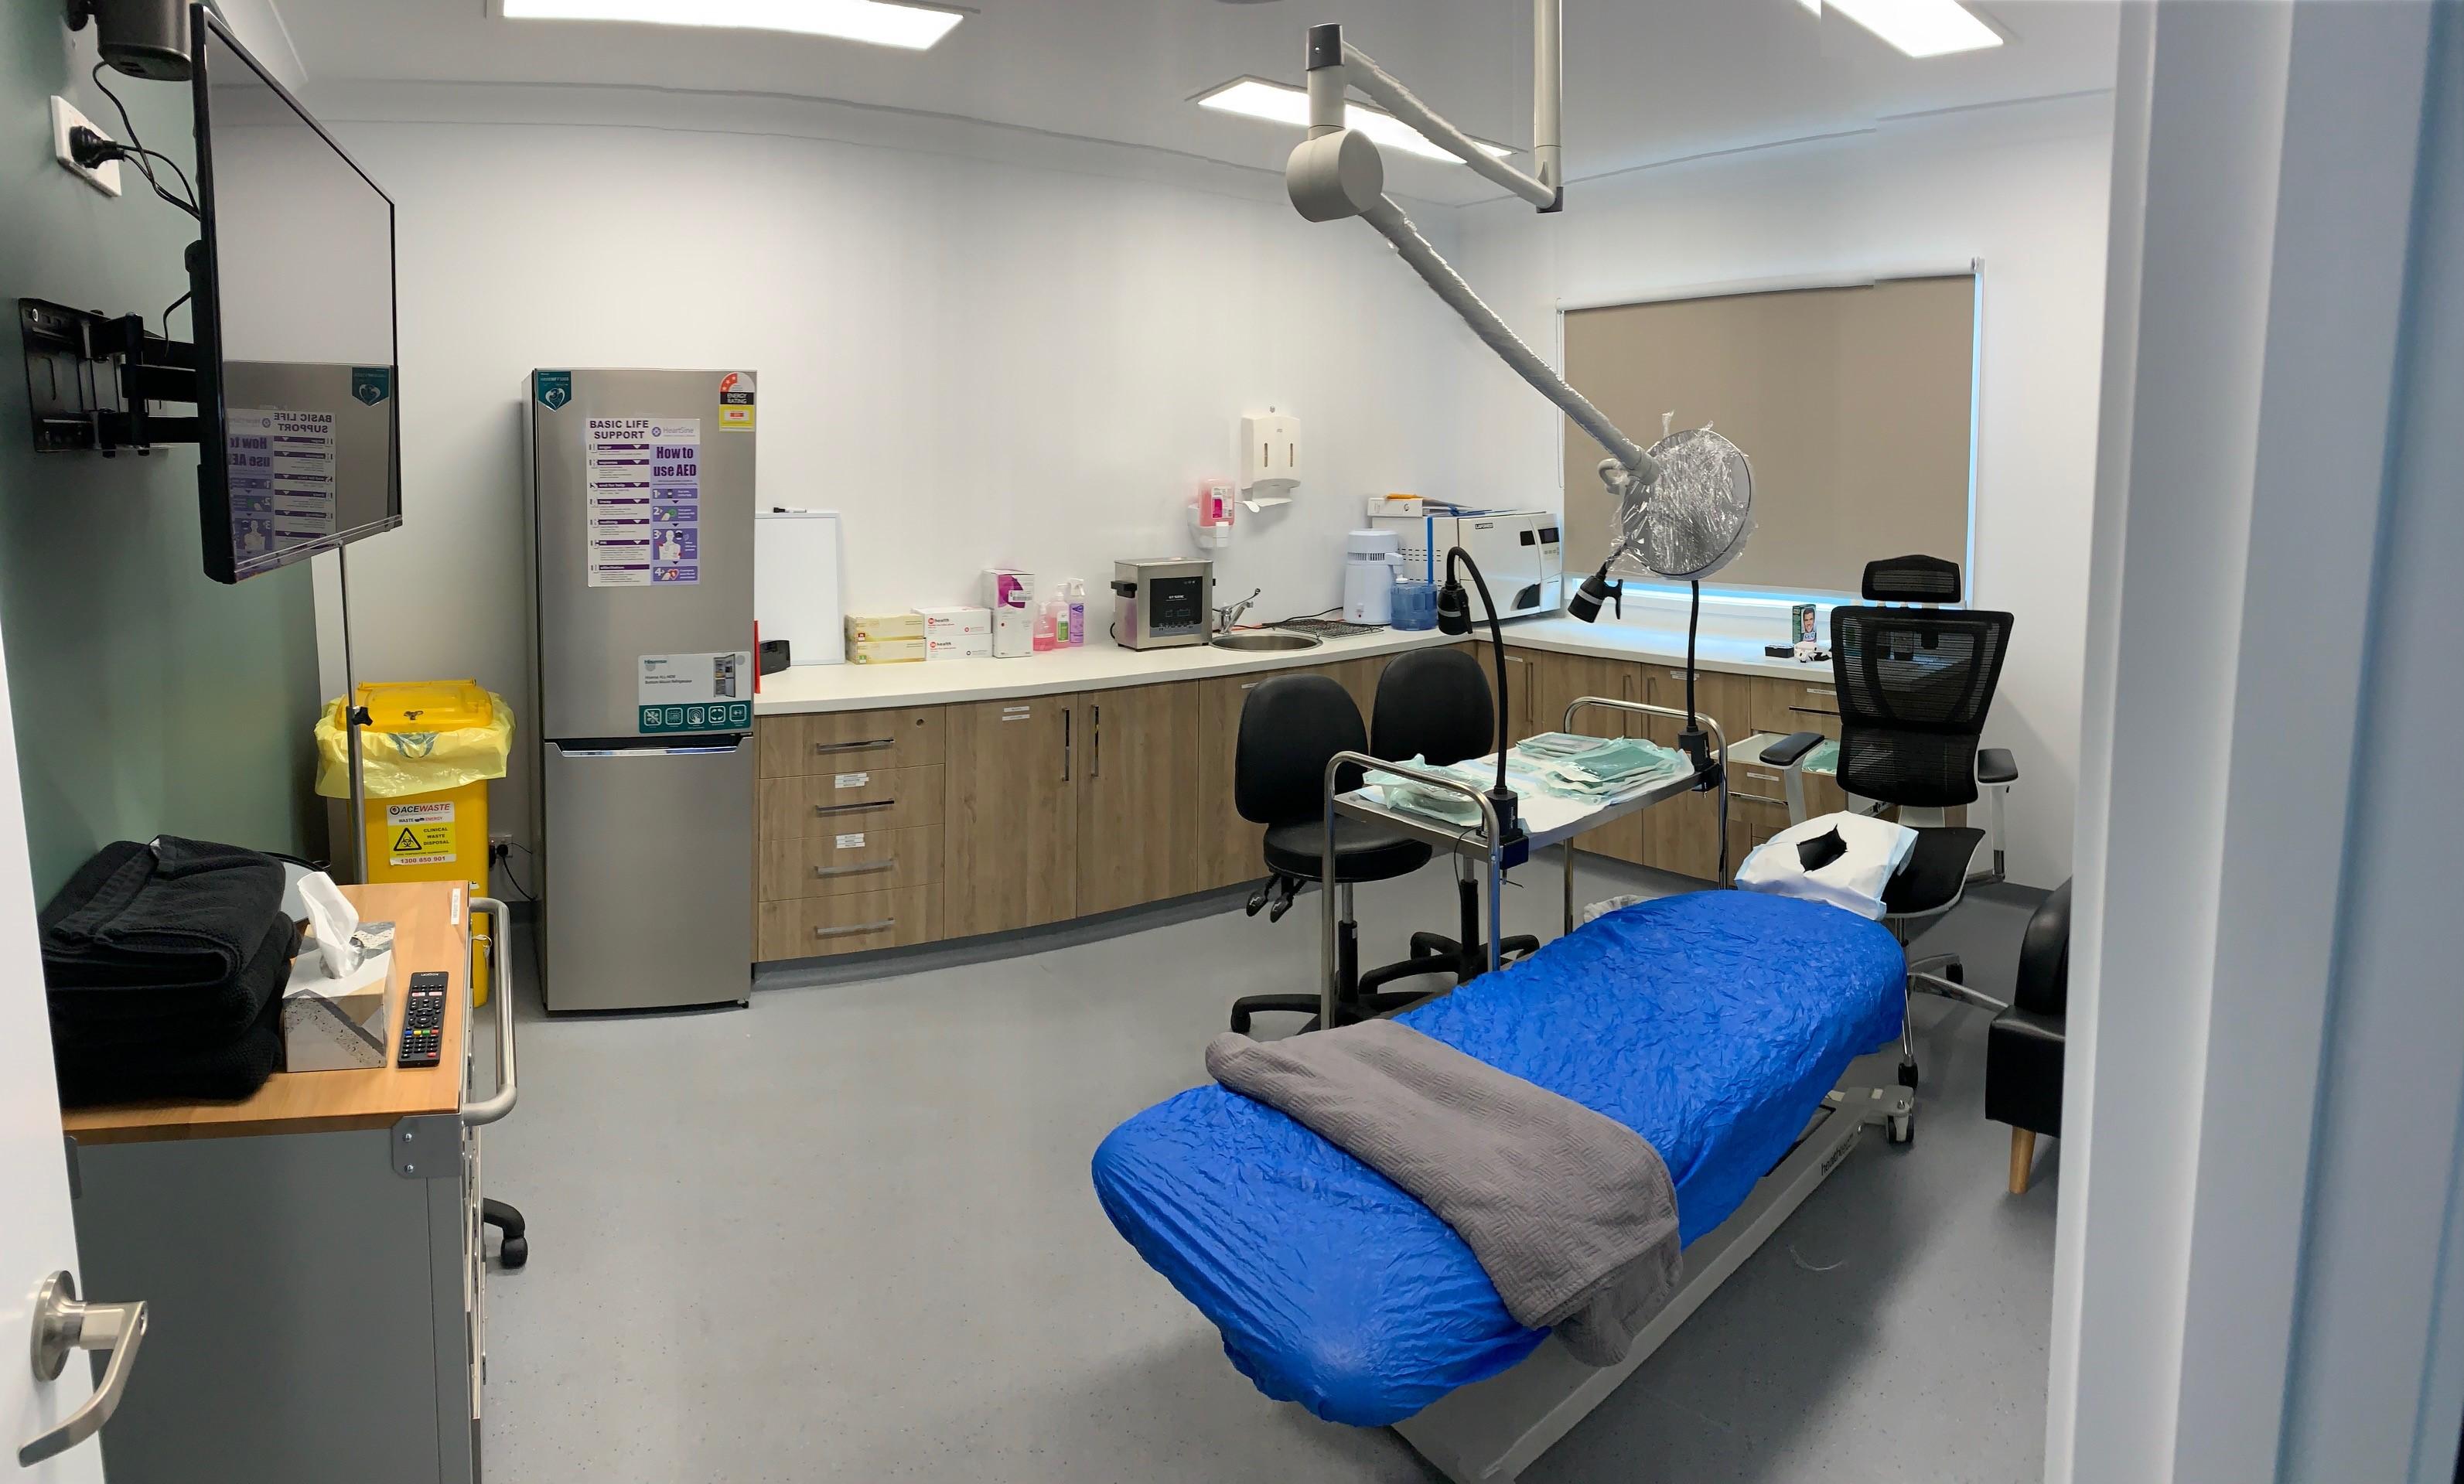 Images Gro - Gold Coast Clinic